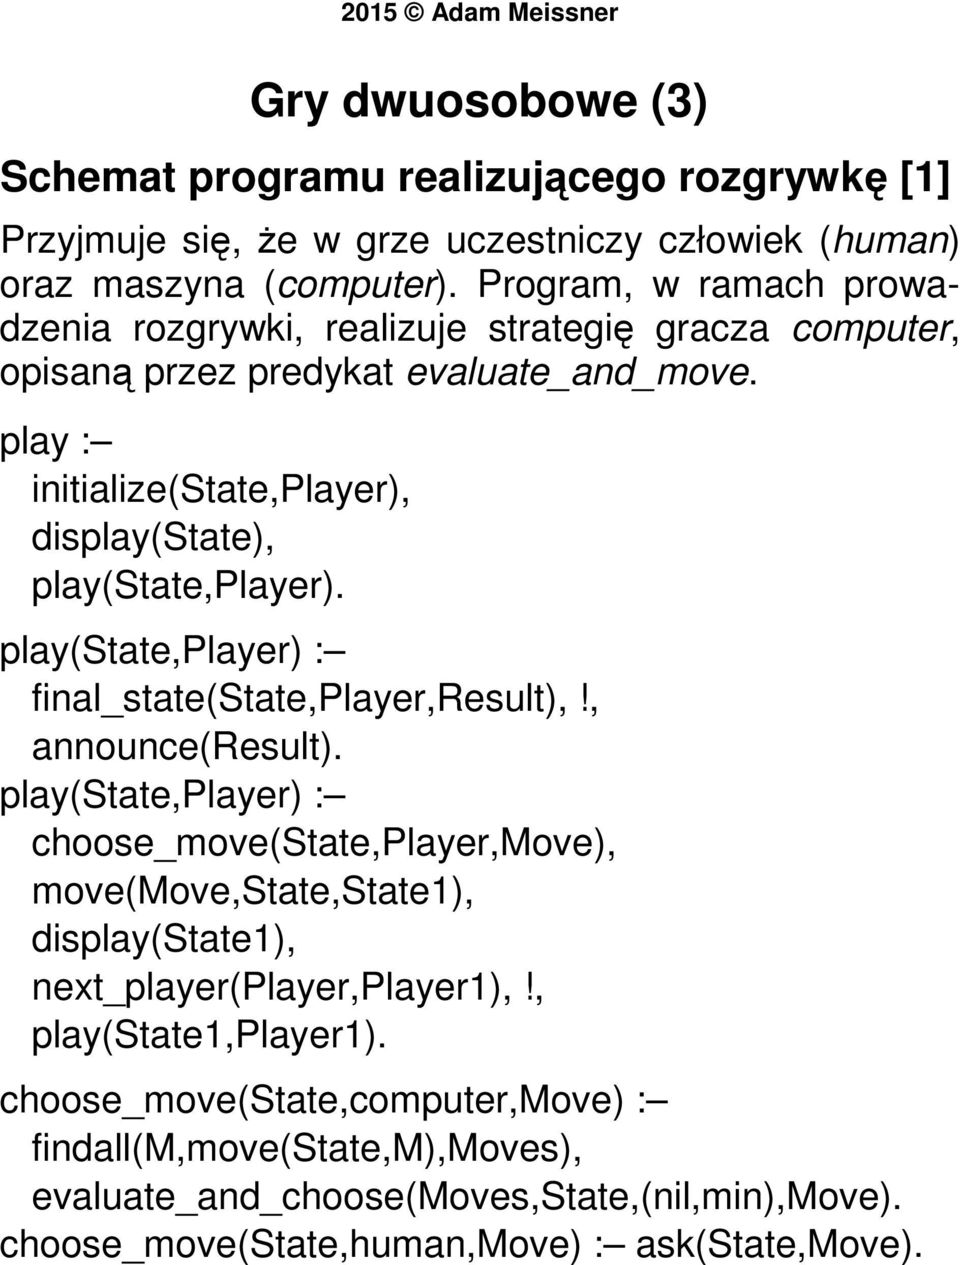 play : initialize(state,player), display(state), play(state,player). play(state,player) : final_state(state,player,result),!, announce(result).